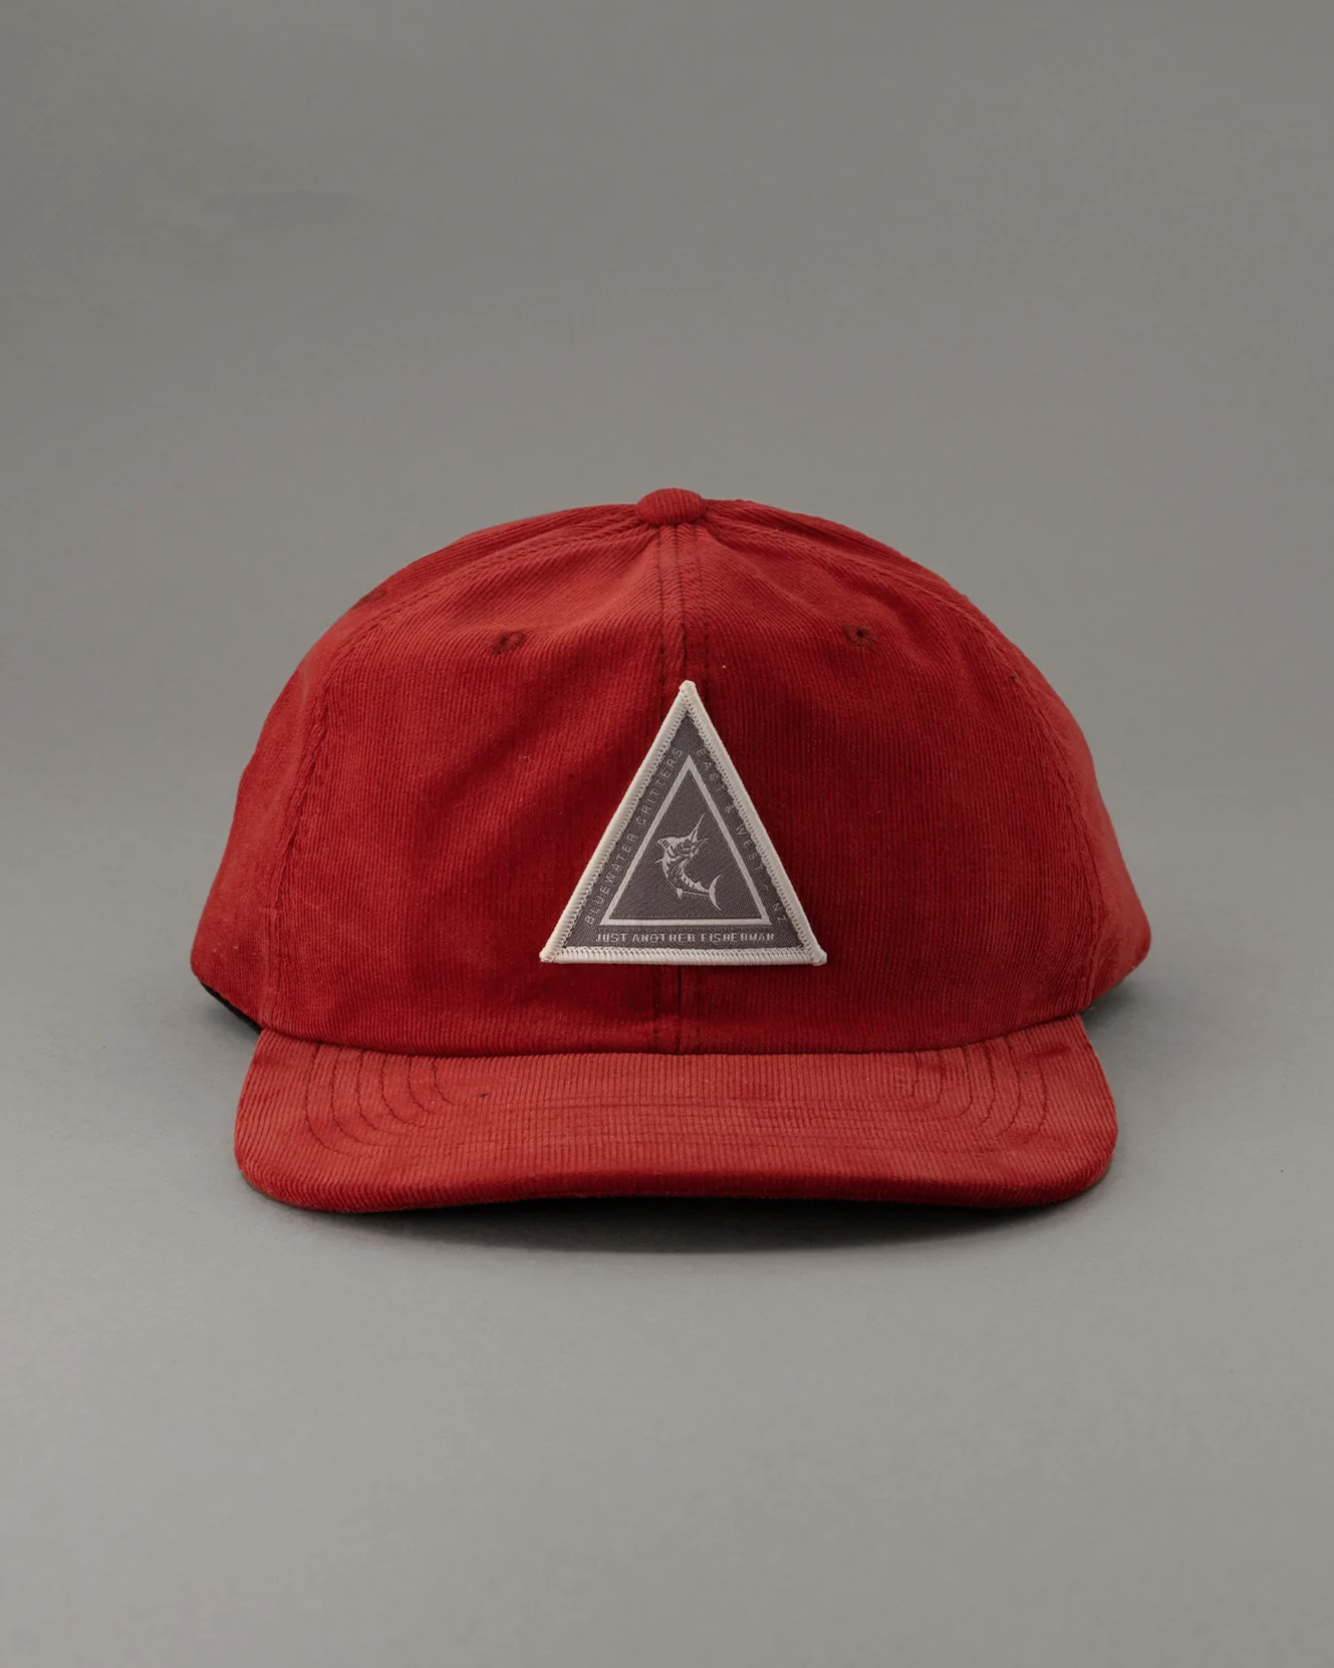 Just Another Fisherman Angled Marlin Cap - Burnt Red